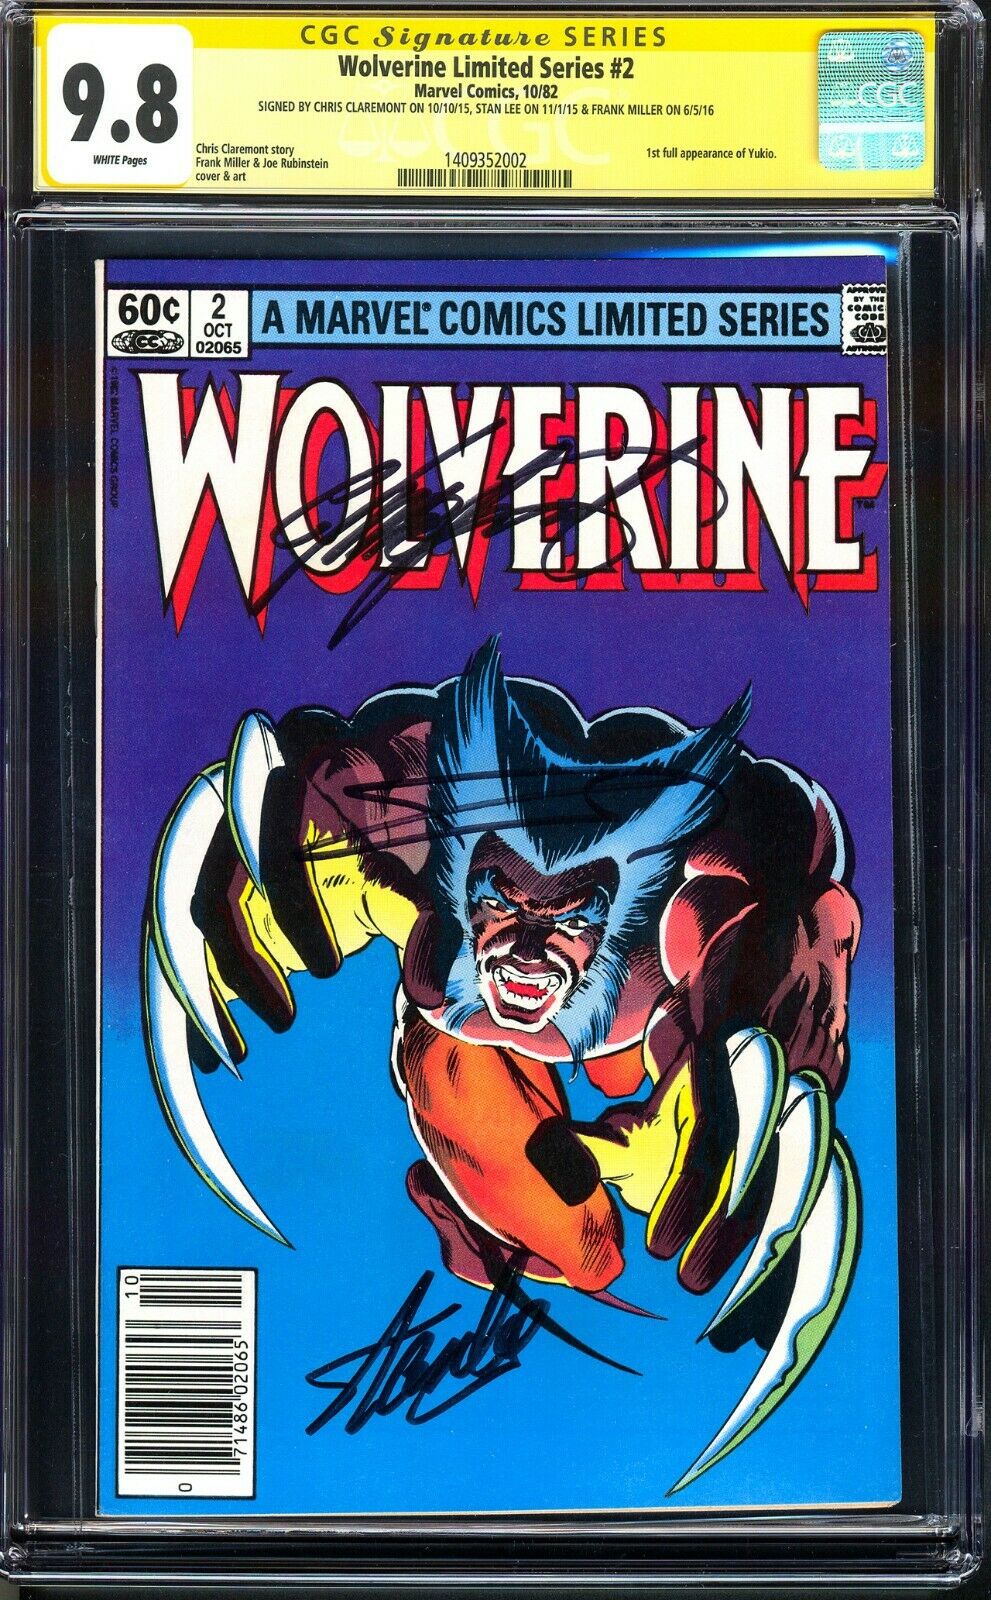 Wolverine Limited Series 2 CGC 98 SS SIGNED BY STAN LEE  FRANK MILLER1 1982